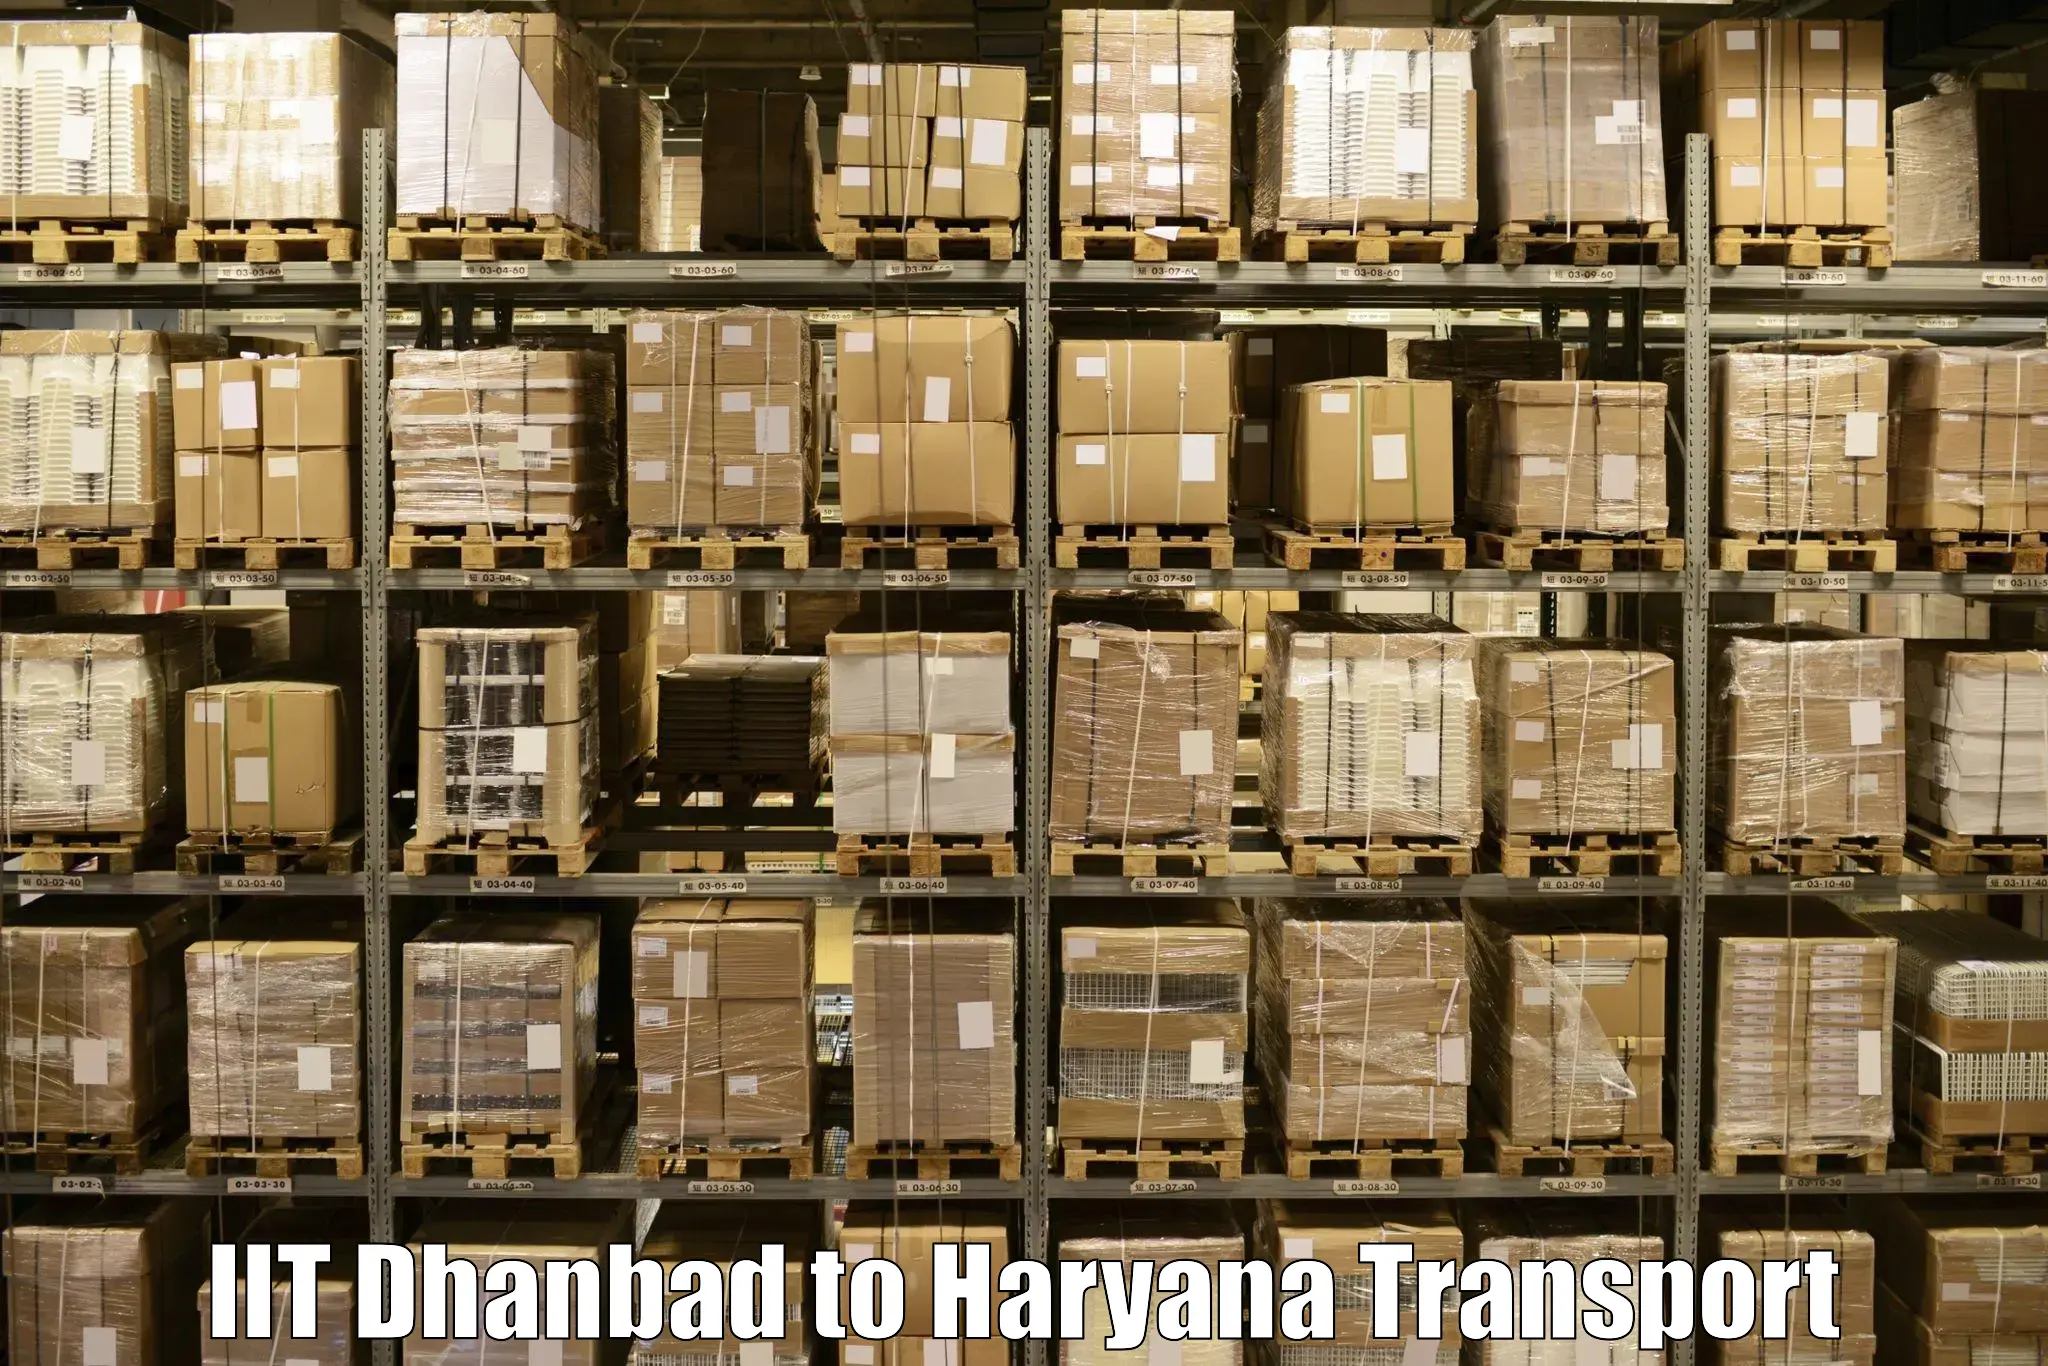 Cargo train transport services IIT Dhanbad to Narnaul